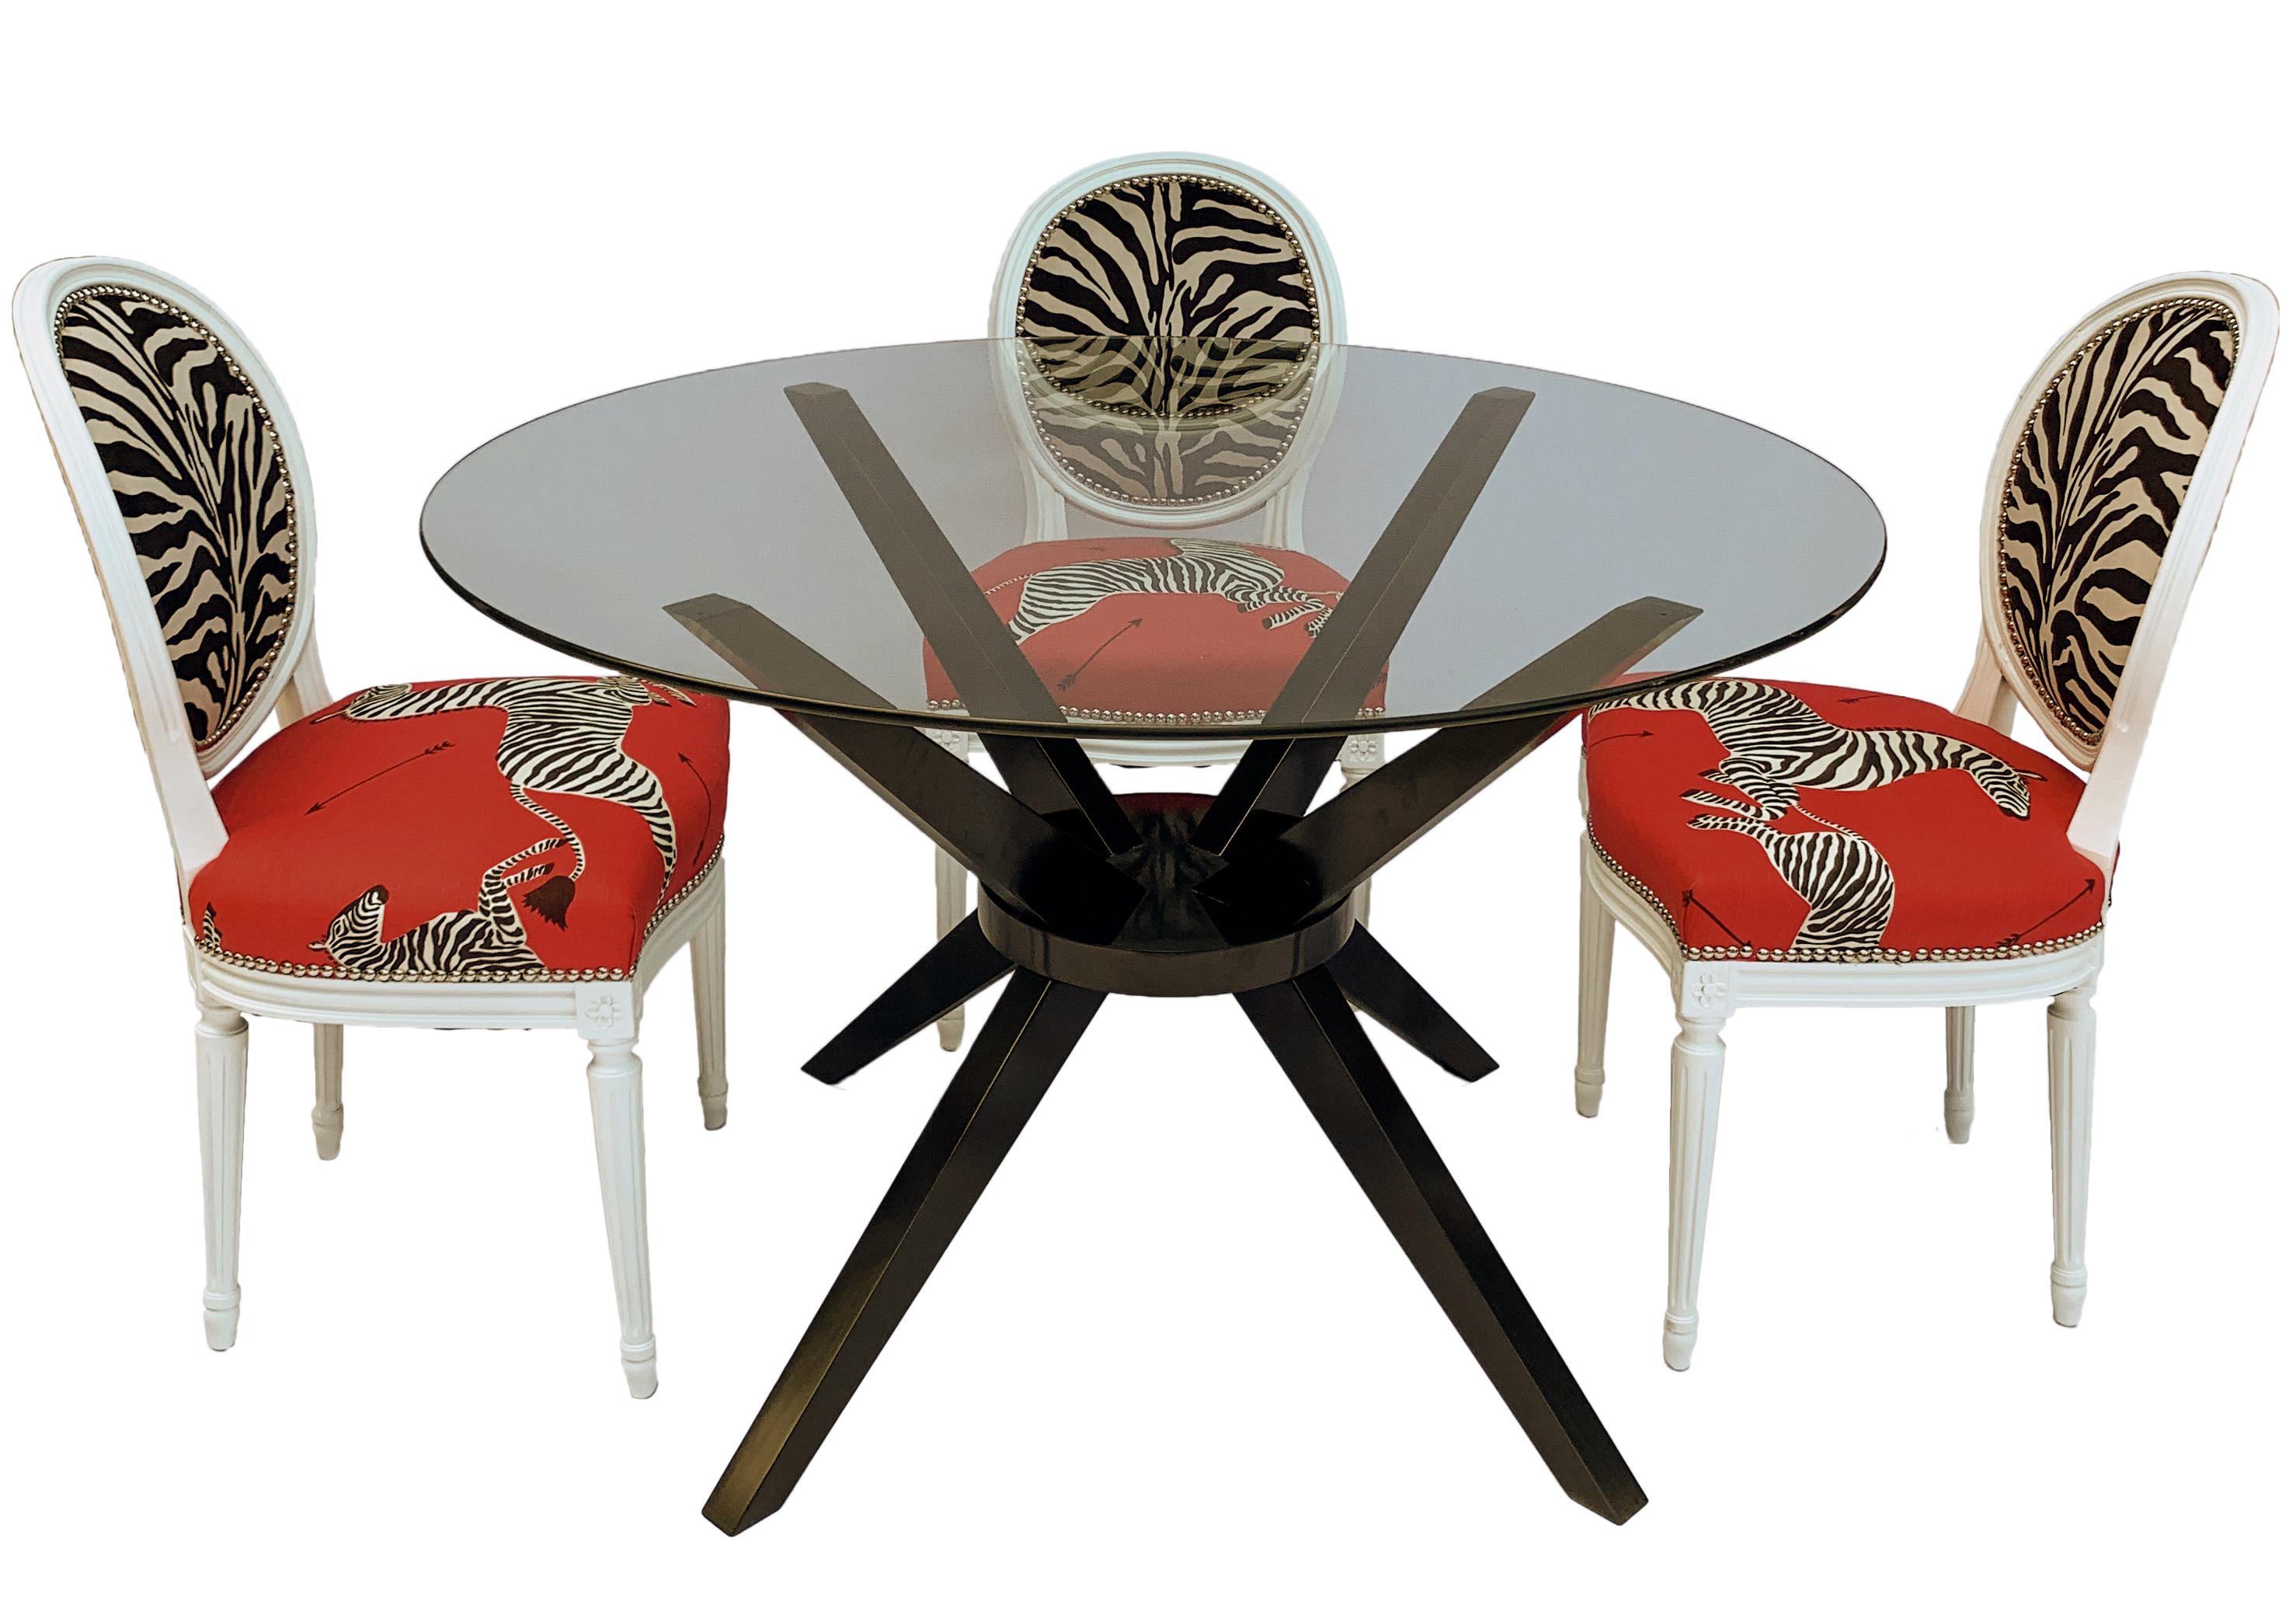 Early 20th century French Louis XVI style dining chairs with modern dining table. The chairs have been lacquered white and the glass top wood table base lacquered in black. The chairs have been reupholstered in Scalamandre’s iconic red masai zebra